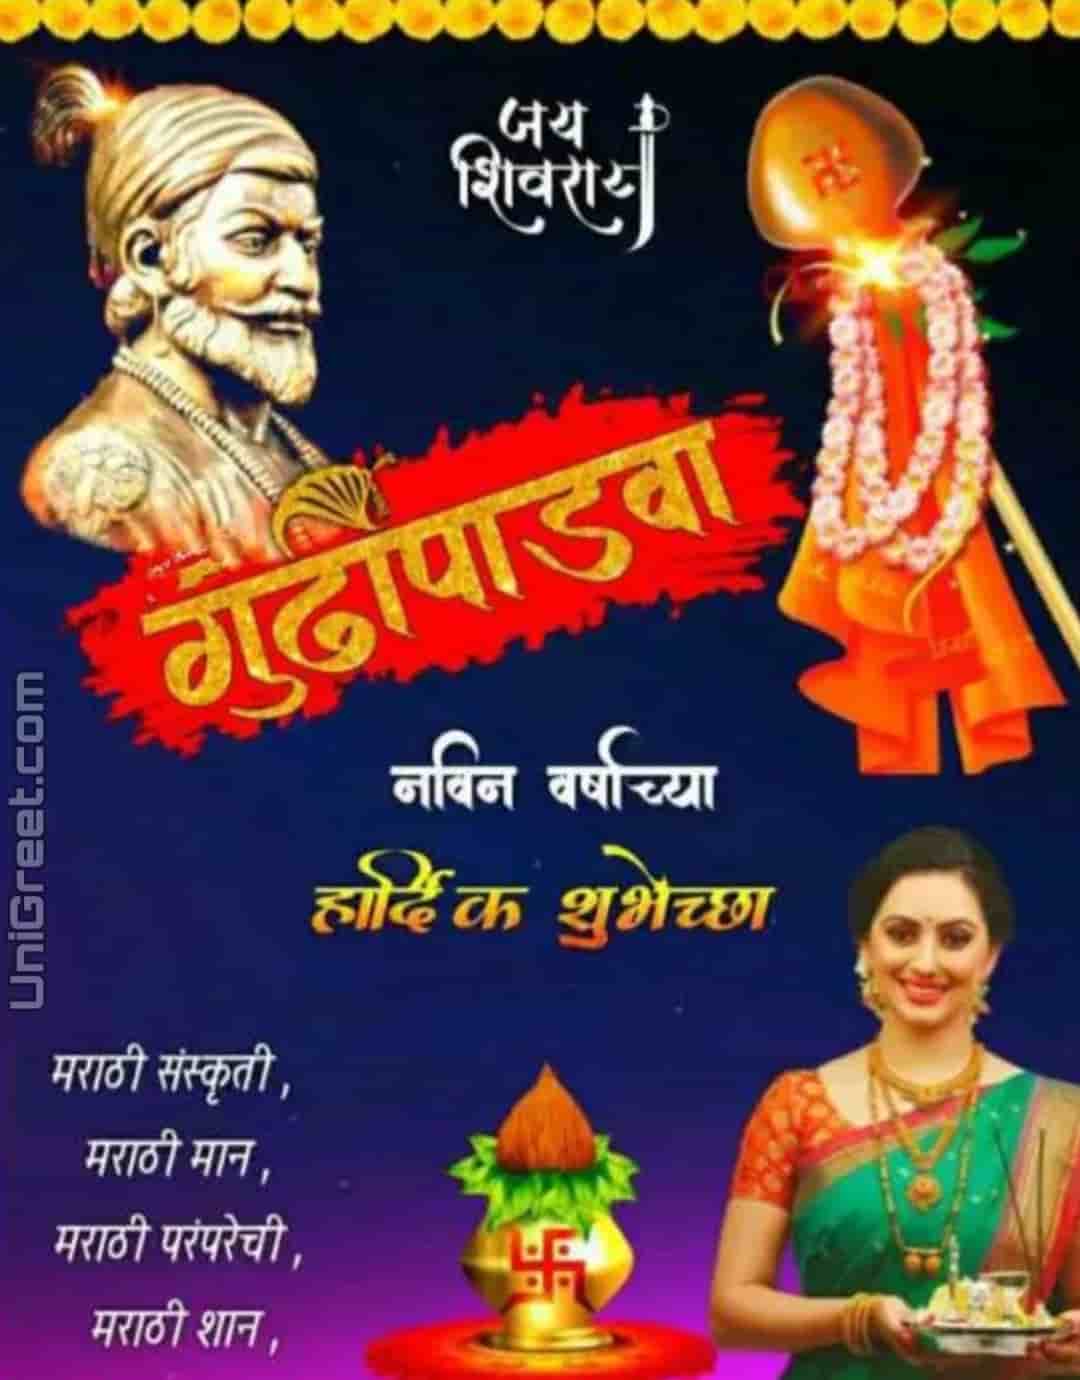 2020 Happy Gudi Padwa Images In Marathi With Gudi Padwa Status Photos This year, gudi padwa will be observed on wednesday, march 25, 2021. 2020 happy gudi padwa images in marathi